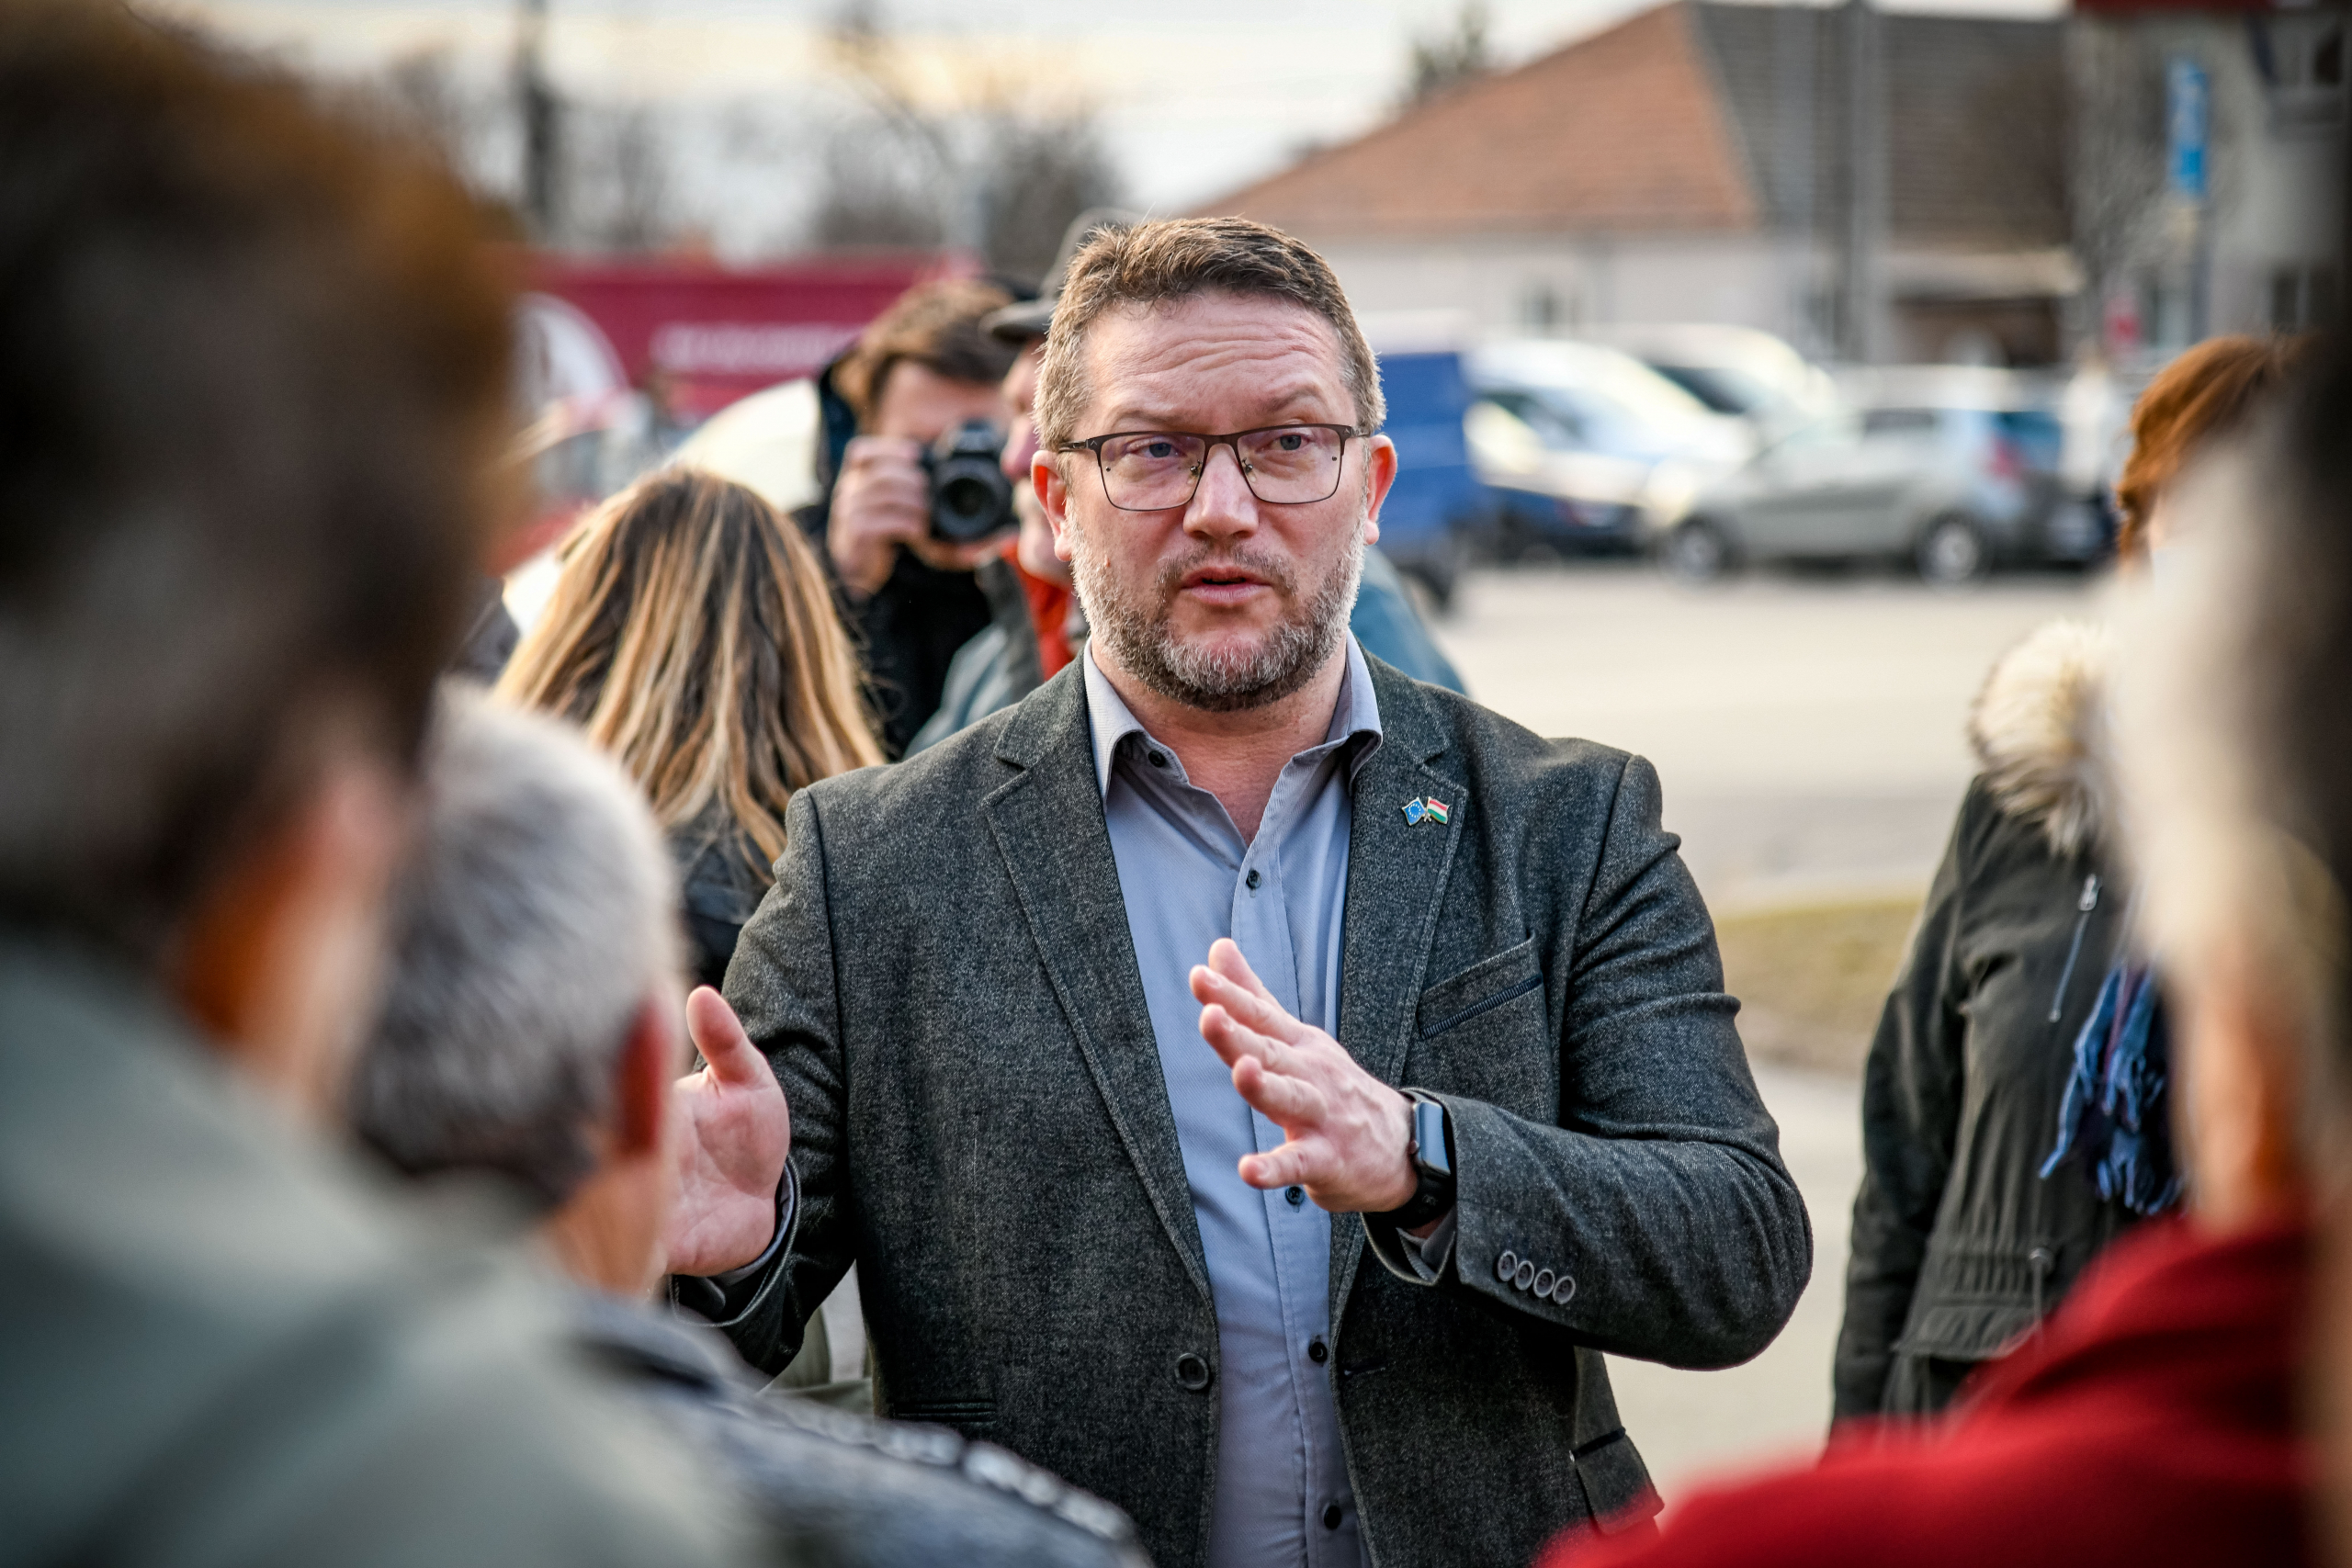 Ujhelyi: Hungarian Government Should Model Social Programmes on Those of Other Member States